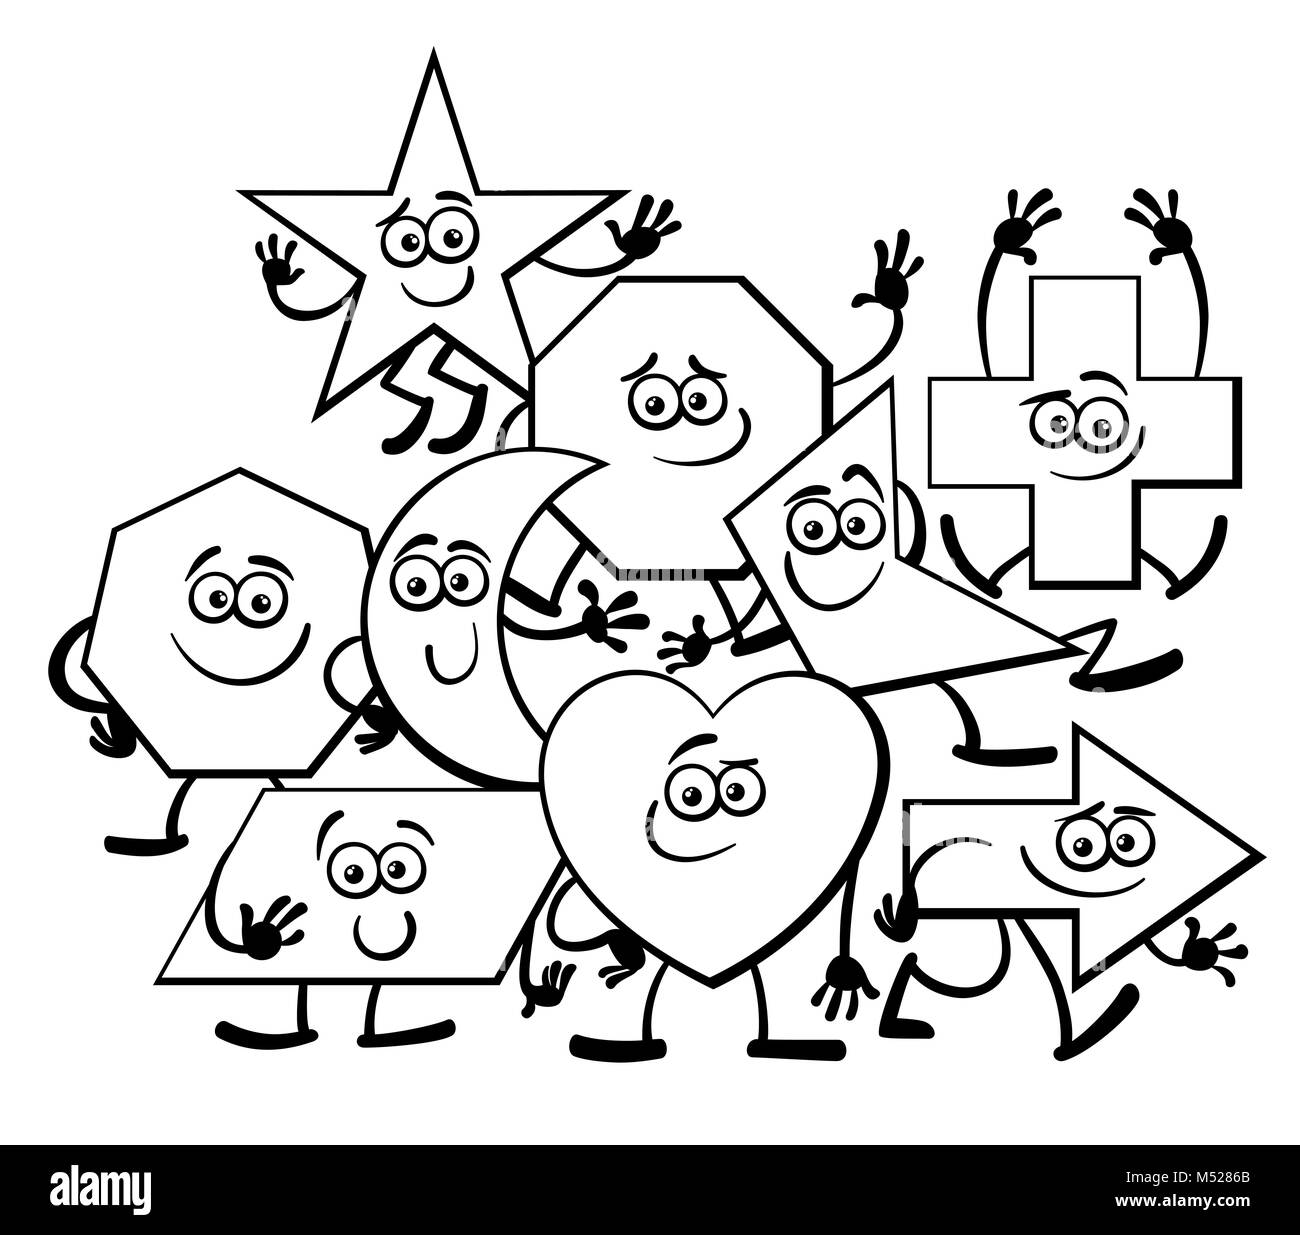 Cartoon Geometric Shapes coloring page Stock Photo